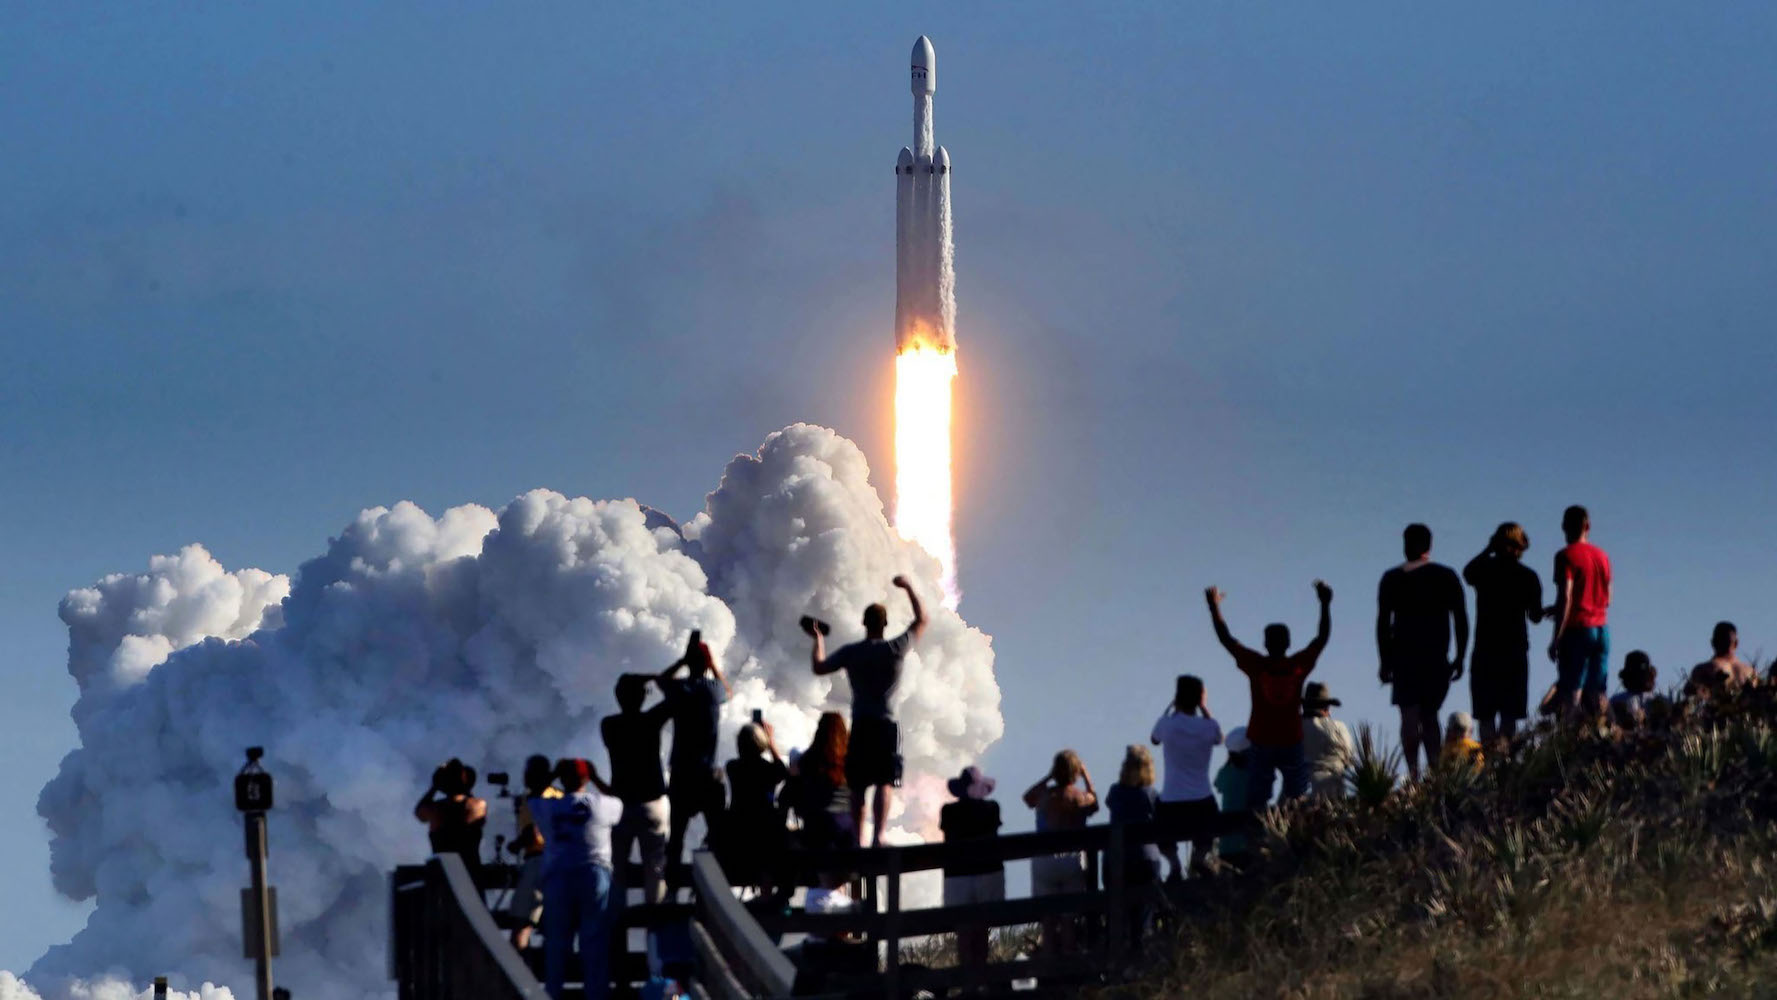 The crowd cheers at Playalinda Beach in the Canaveral National Seashore, just north of the Kennedy Space Center, during the launch of the SpaceX Falcon Heavy rocket, on Feb. 6, 2018. Playalinda is one of closest public viewing spots to see the launch, about 3 miles from the SpaceX launchpad 39-A. (Joe Burbank/Orlando Sentinel/Tribune News Service via Getty Images)